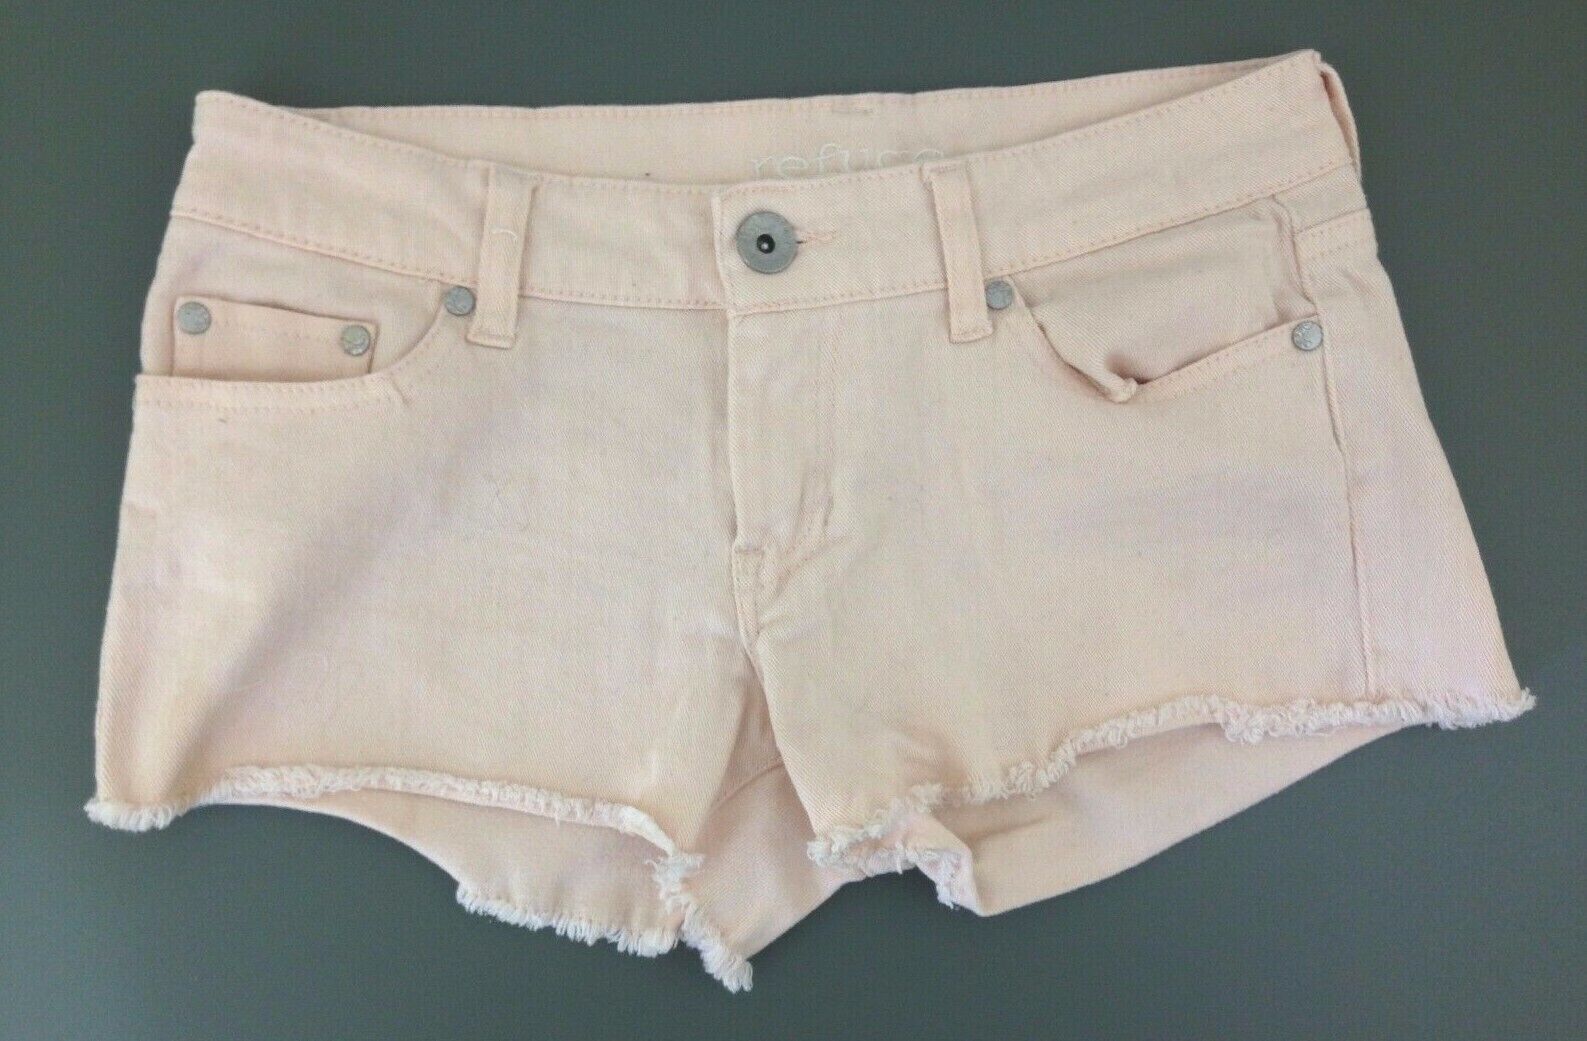 Primary image for Refuge Women's Size 2 Pale Peach Cotton Blend Low Rise Cut Off Short Shorts